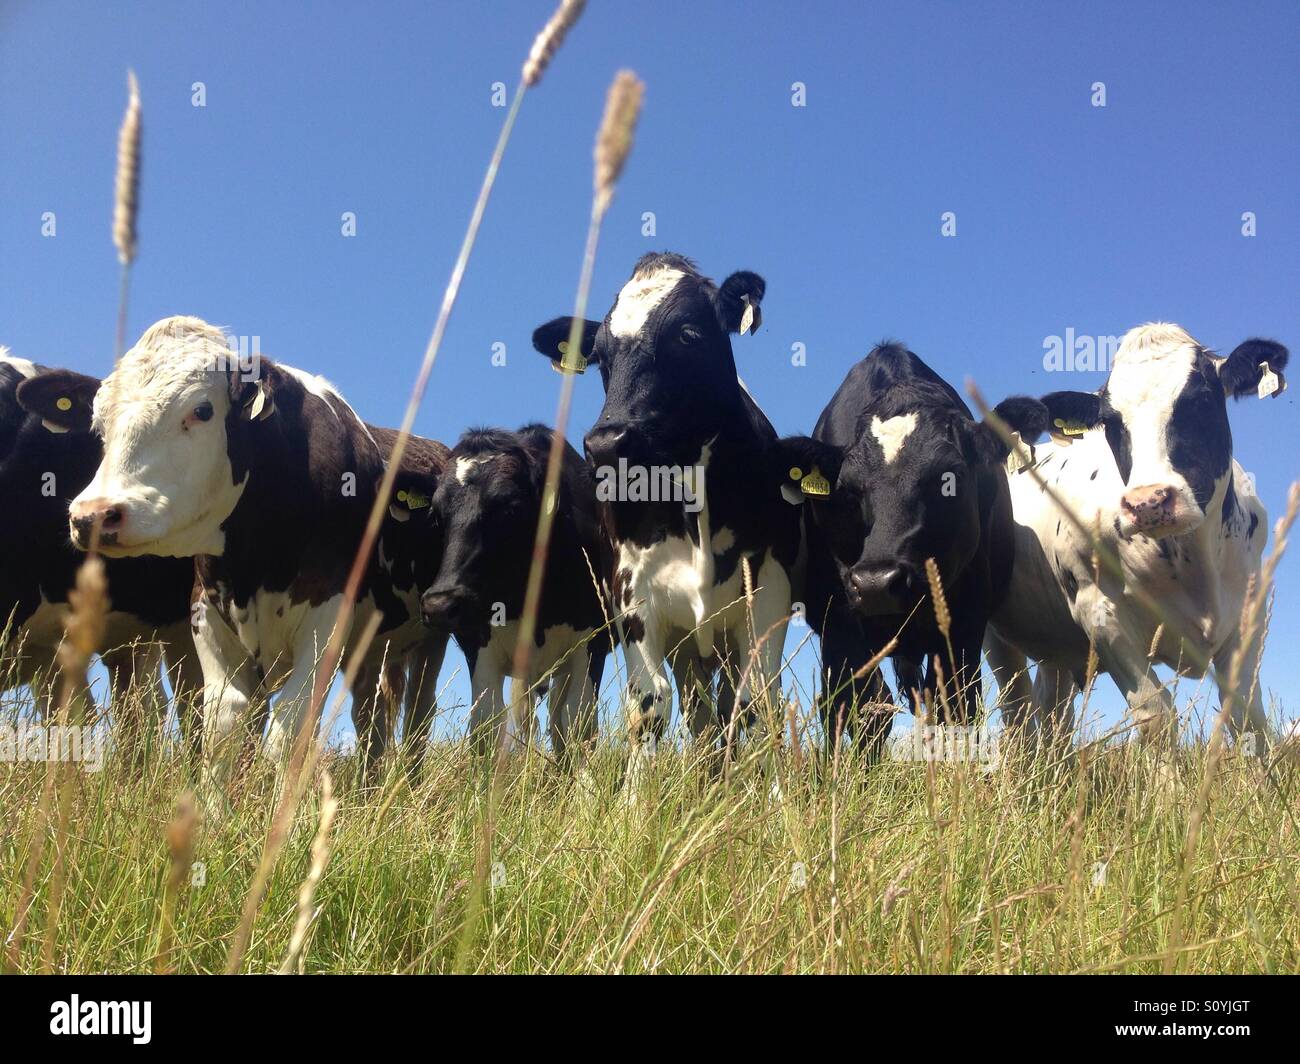 Friendly curious cows Stock Photo